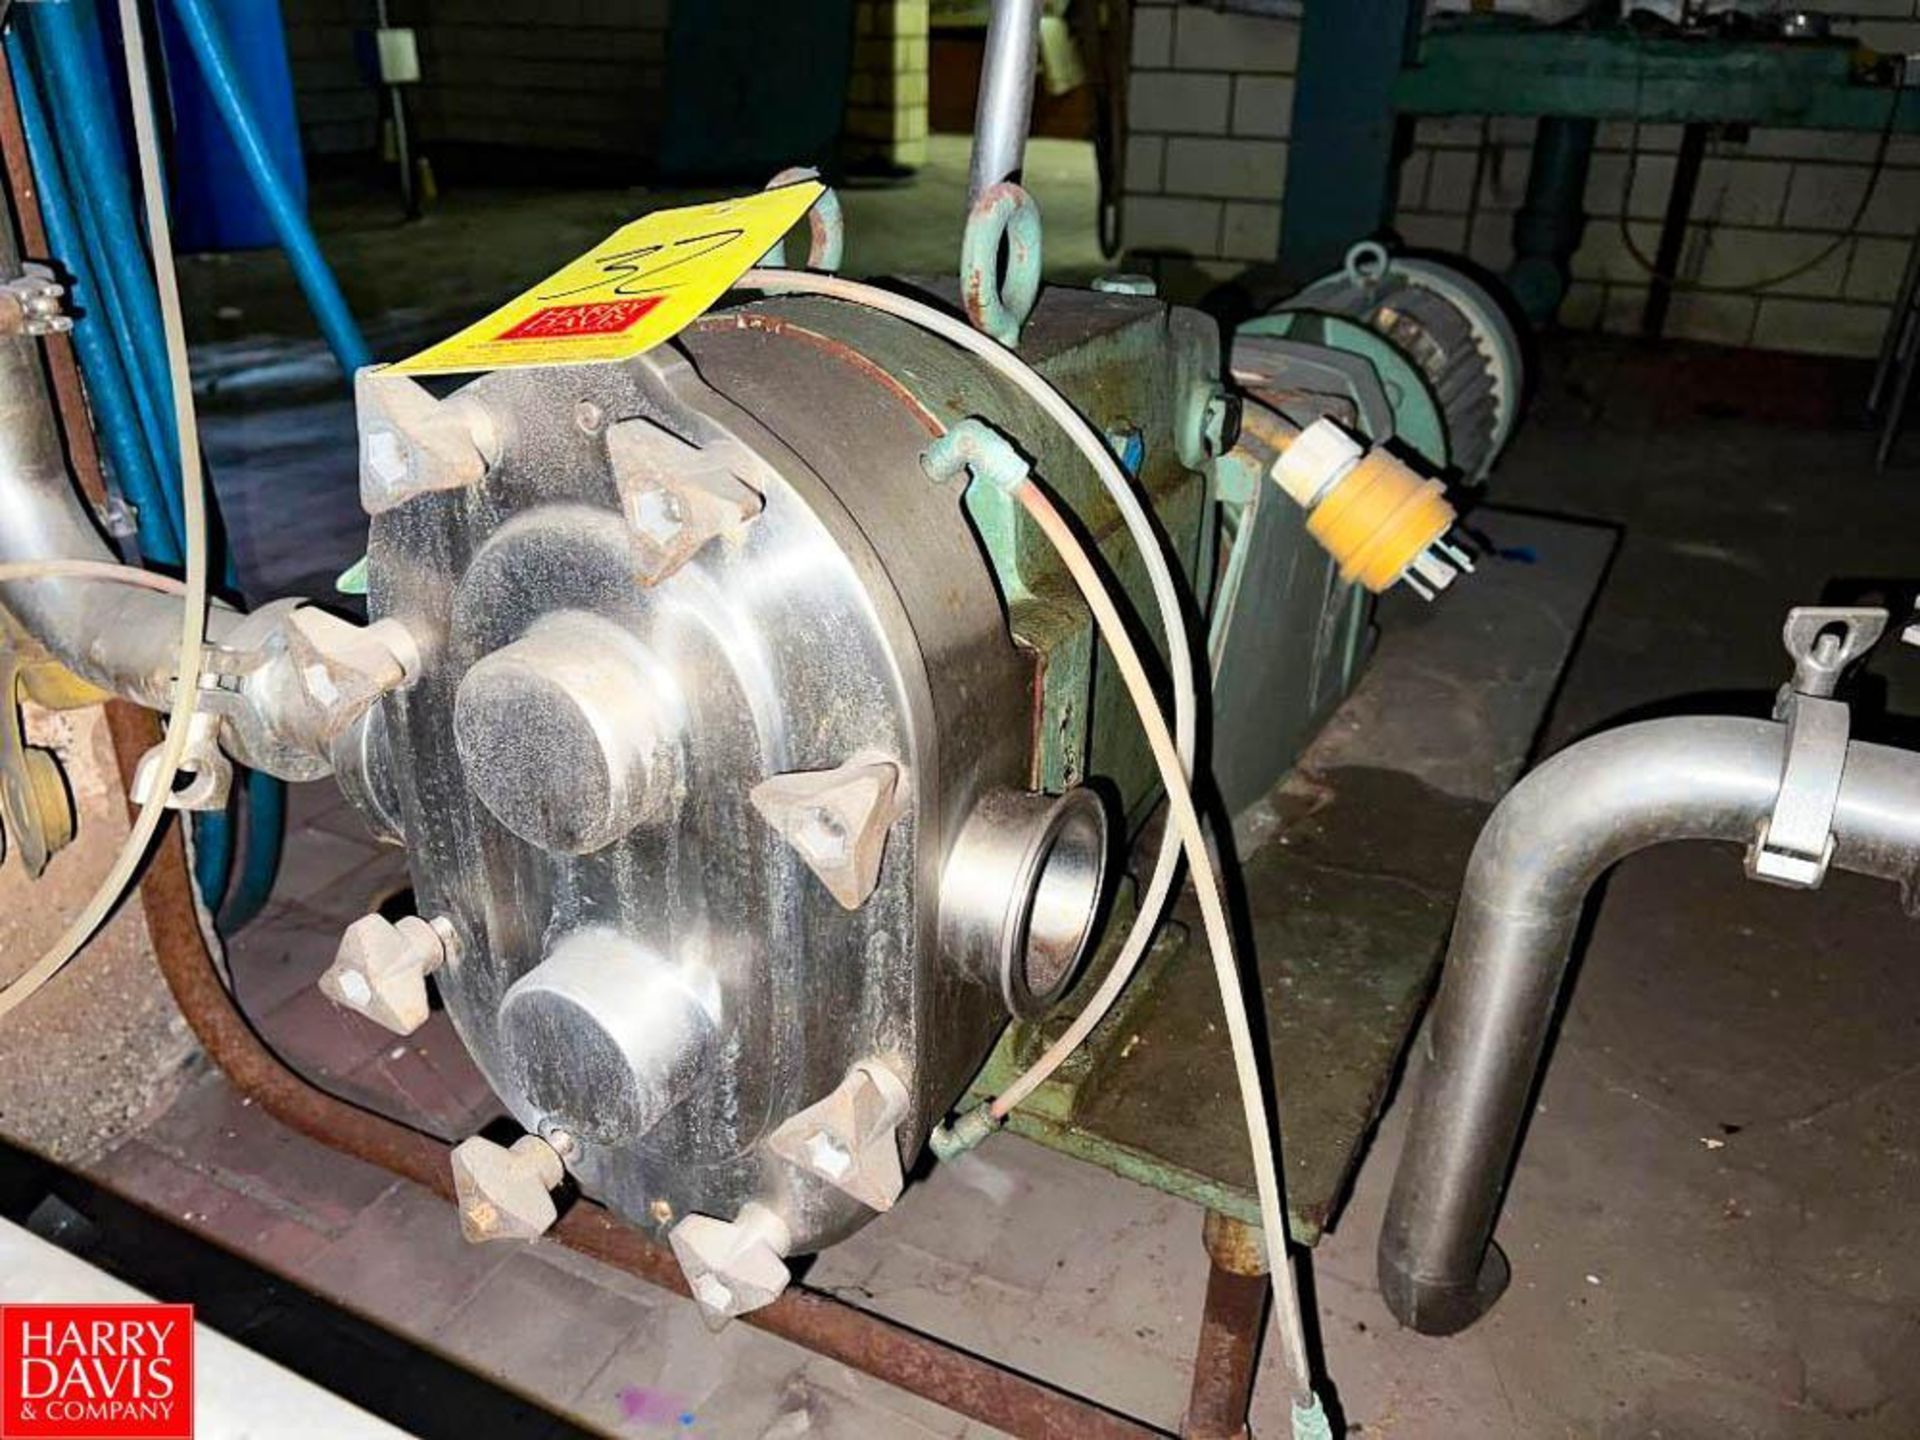 Waukesha Cherry-Burrell Positive Displacement Pump with 5 HP 1,725 RPM Motor 2.5" S/S Head